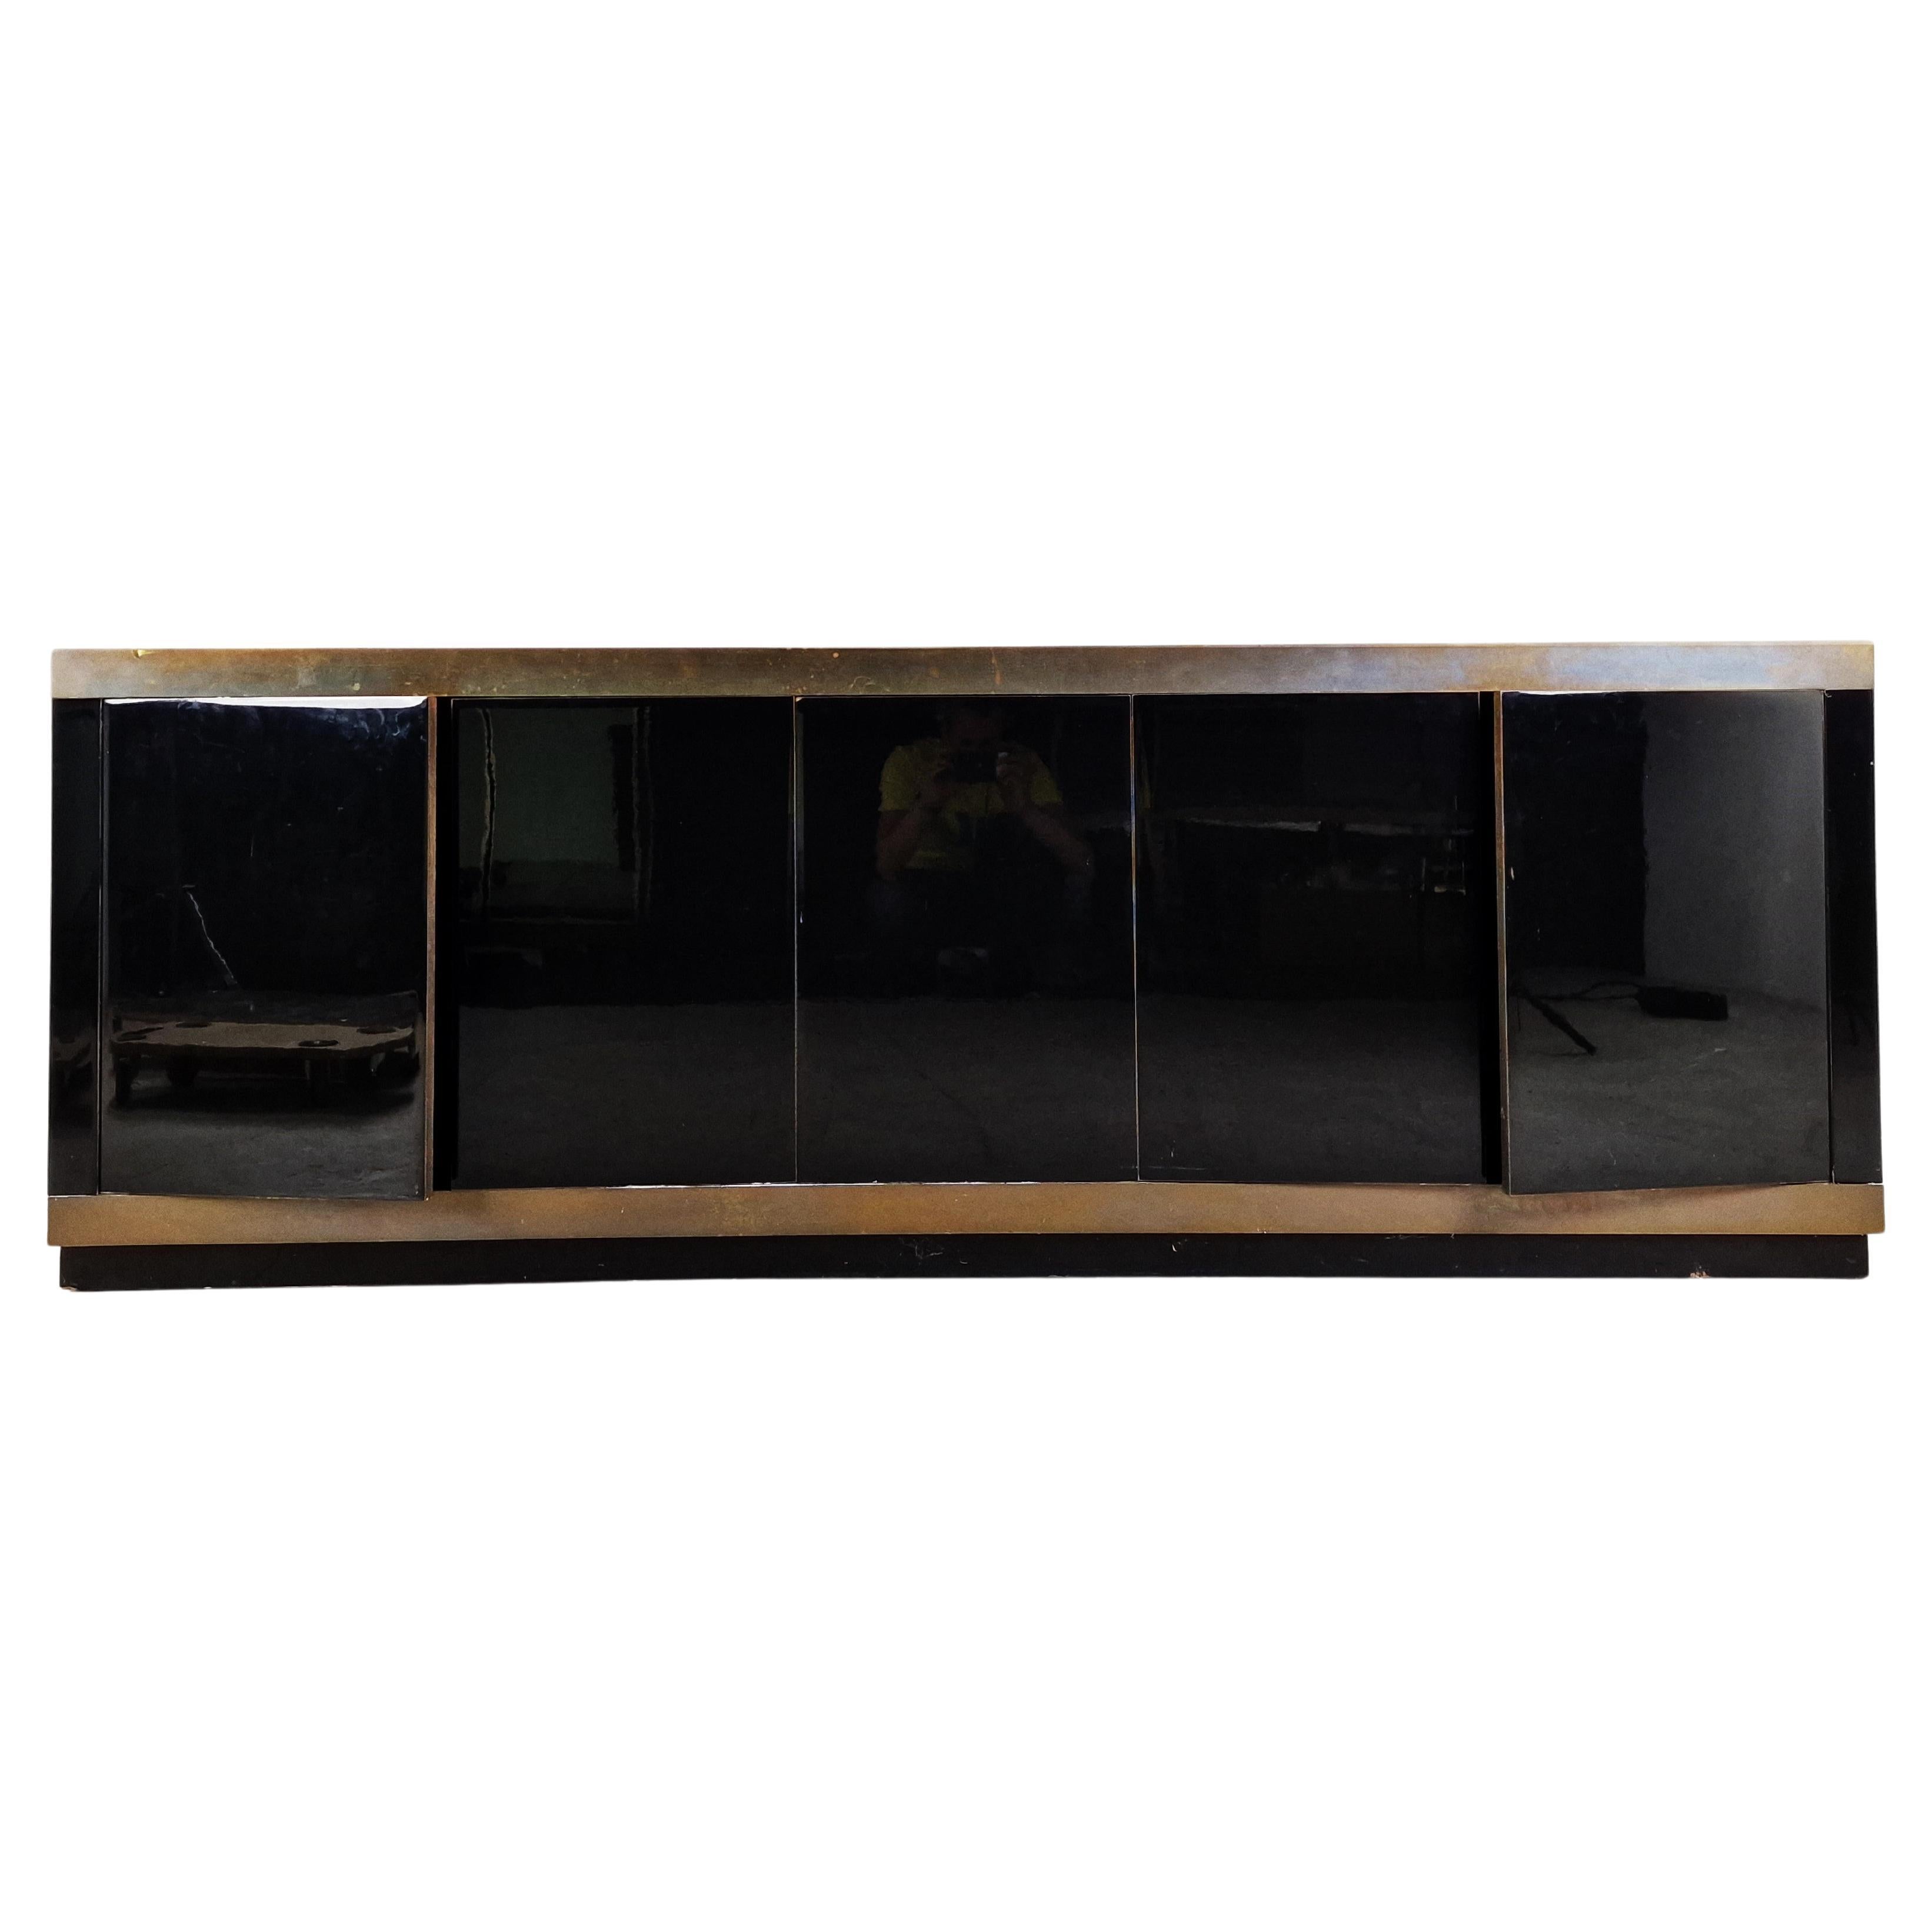 Brass and Lacquer Maison Jansen Sideboard, 1970s